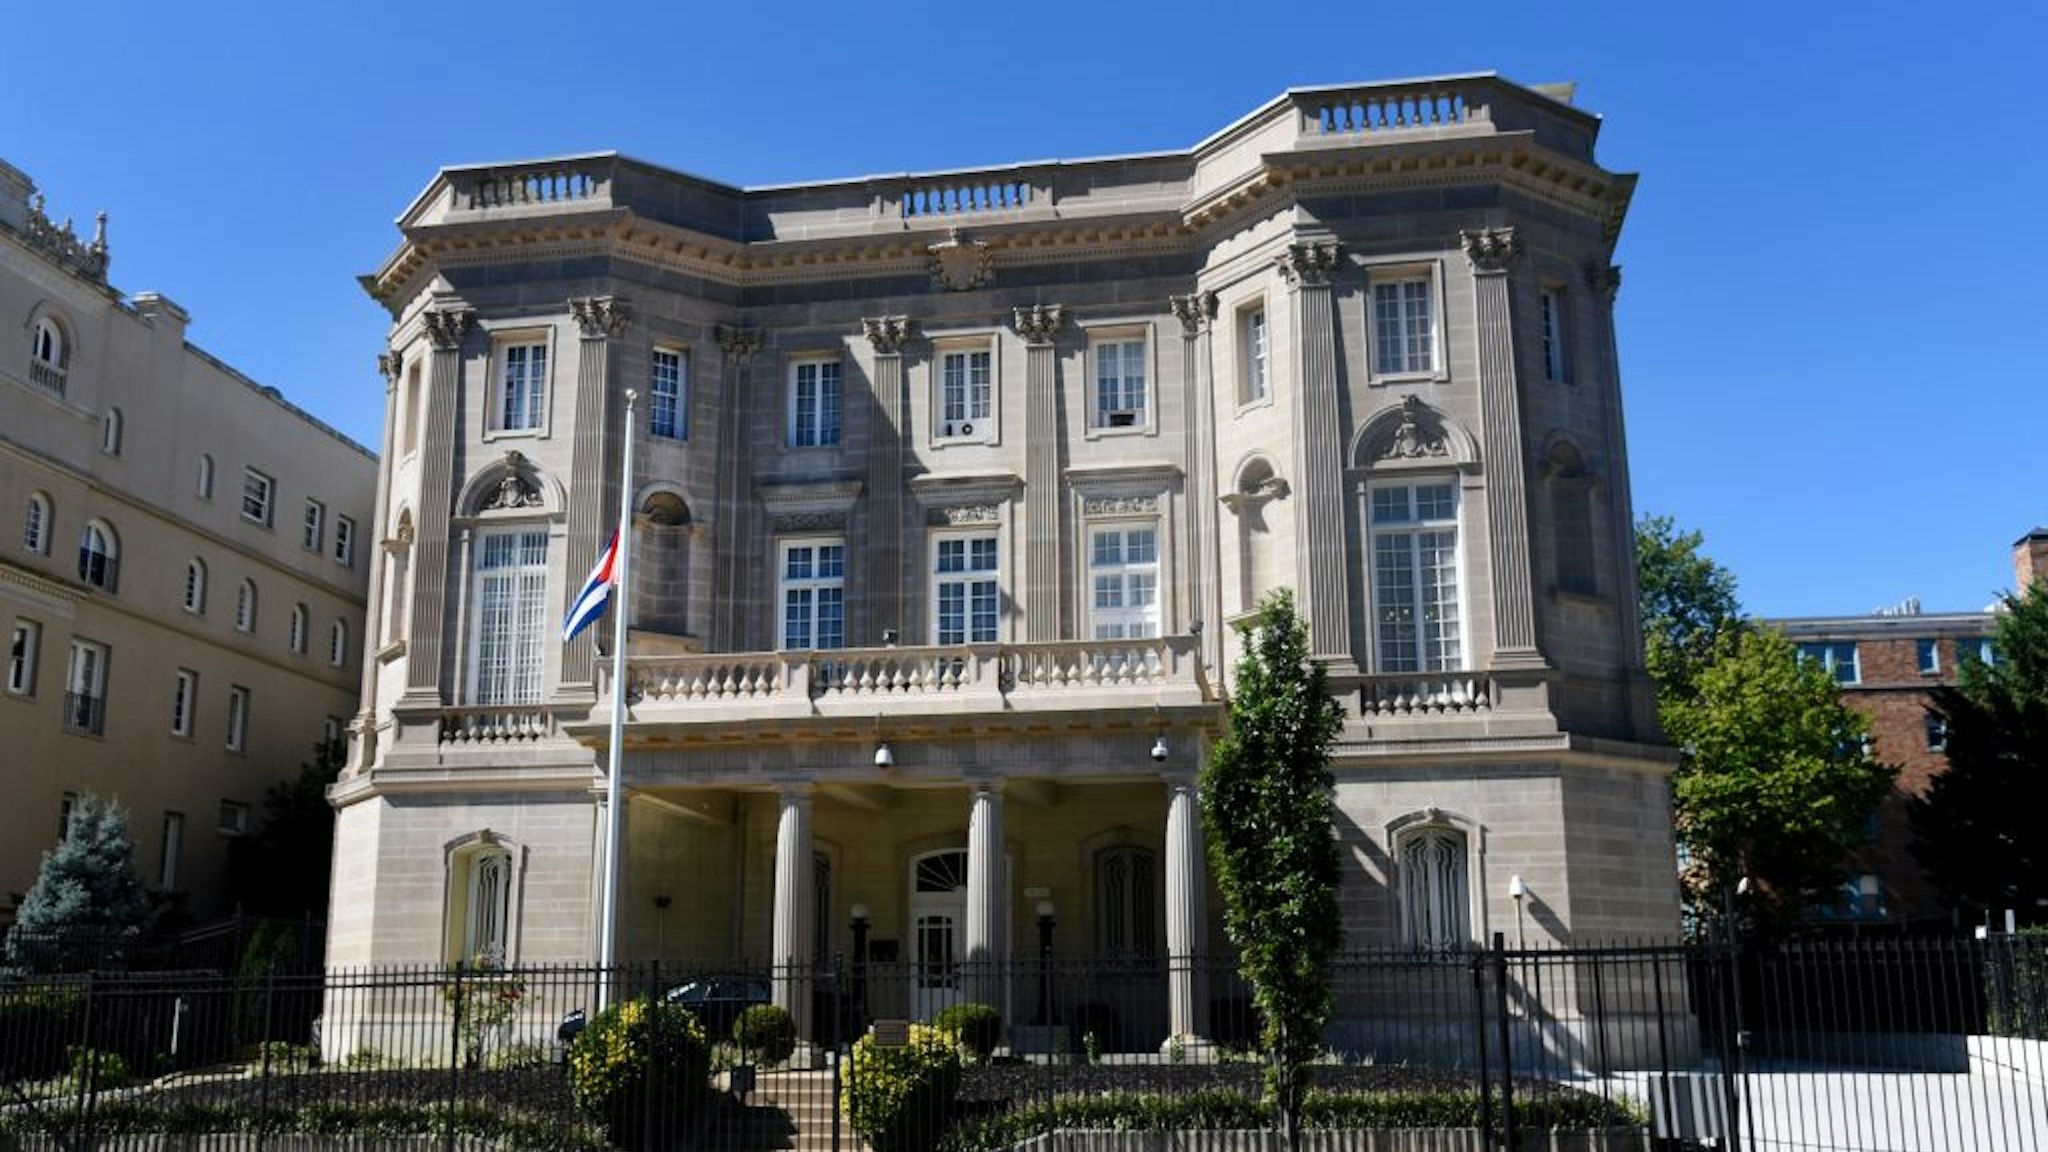 WASHINGTON, DC - OCTOBER 03: The Cuban flag waves outside of the Embassy of Cuba in Washington, DC on October 3, 2017 in Washington, DC. The U.S. orders on Tuesday the expulsion of 15 Cuban Diplomats from the washington DC Embassy.